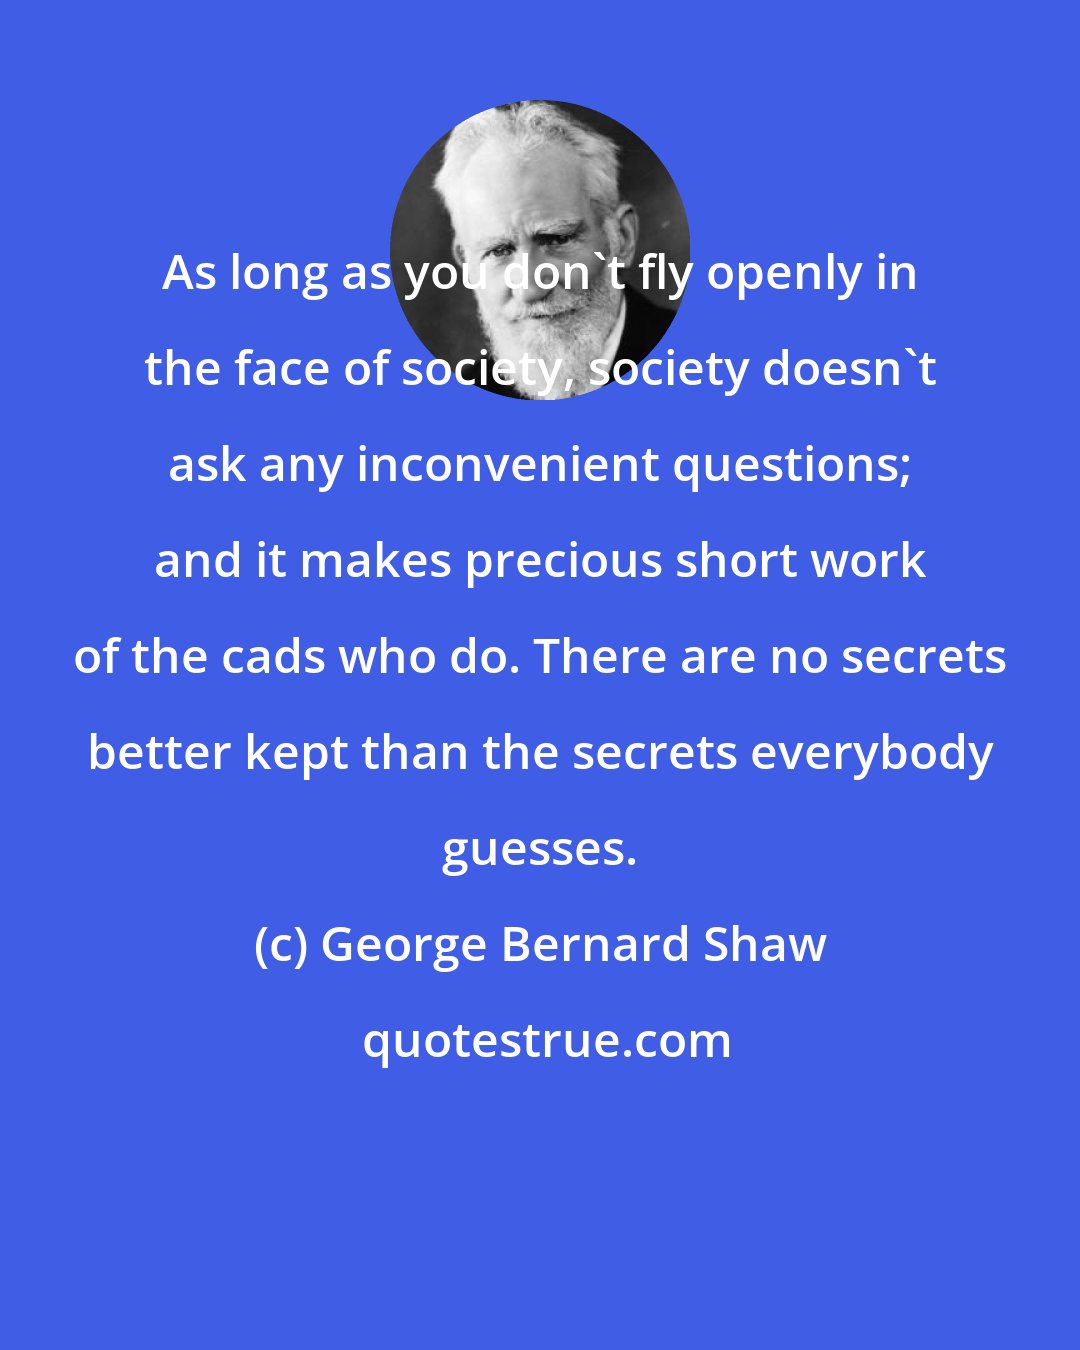 George Bernard Shaw: As long as you don't fly openly in the face of society, society doesn't ask any inconvenient questions; and it makes precious short work of the cads who do. There are no secrets better kept than the secrets everybody guesses.